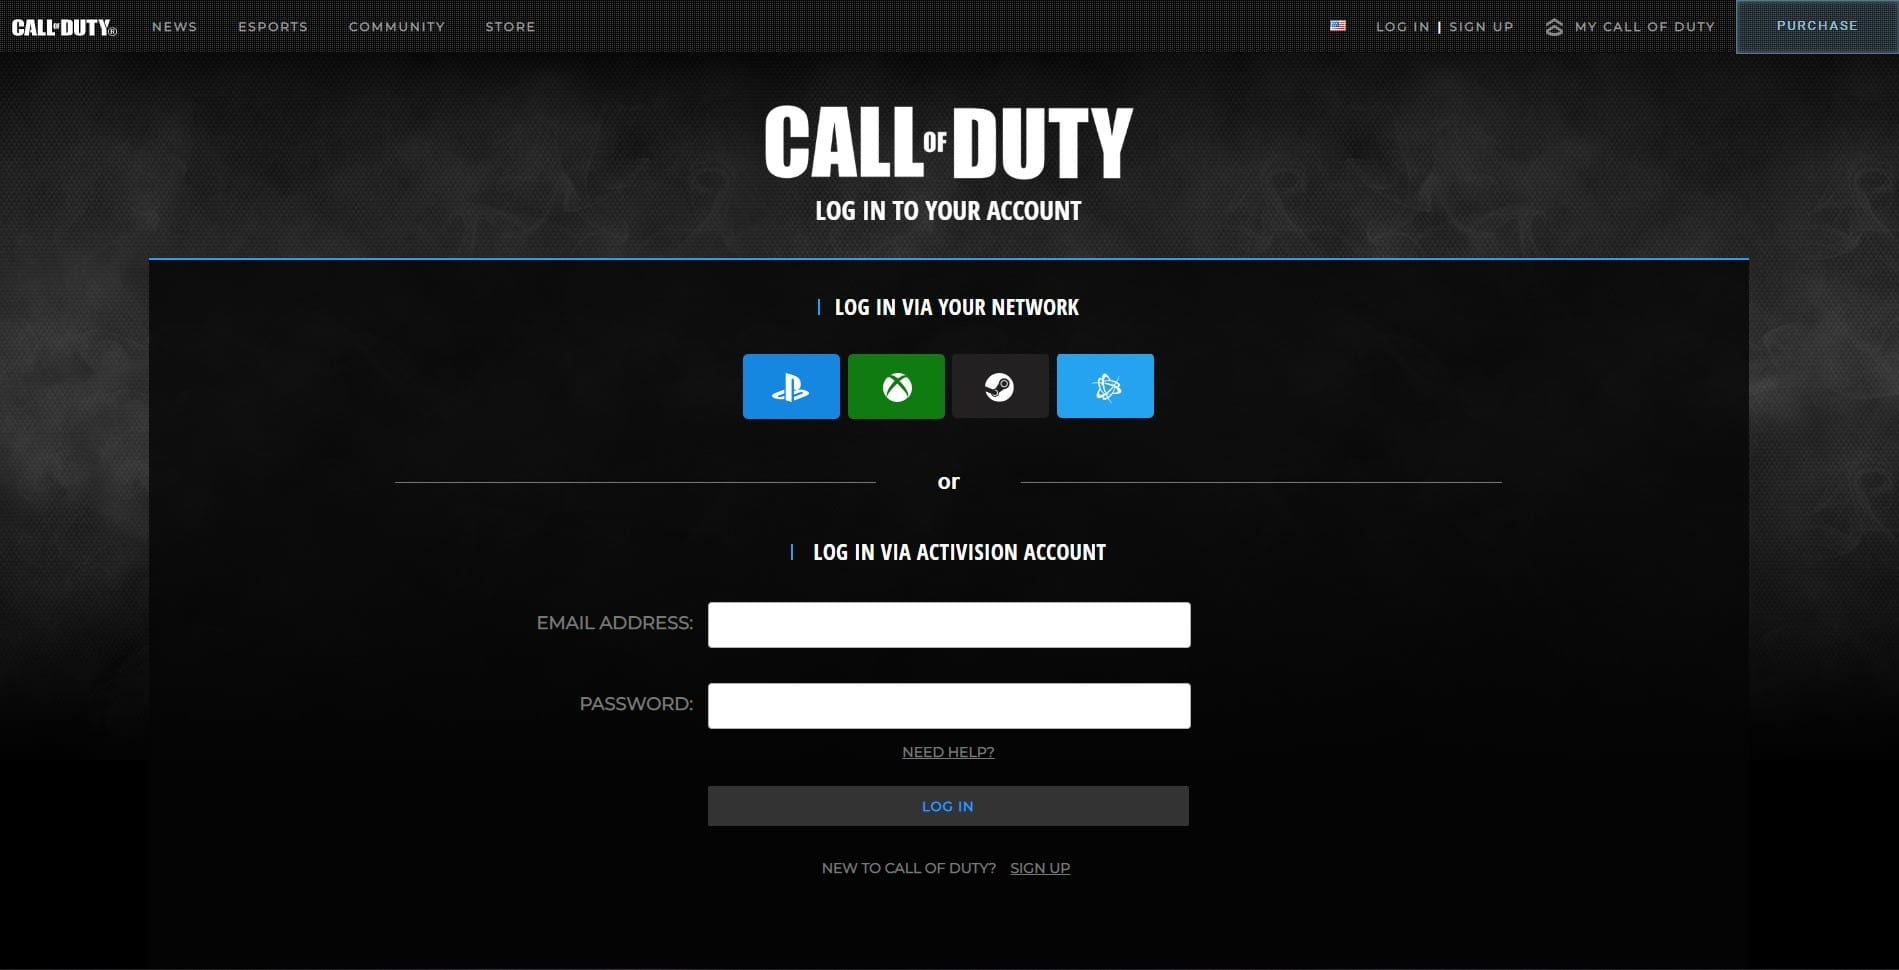 Modern Warfare How To Redeem Double Xp Codes Use 2xp Tokens